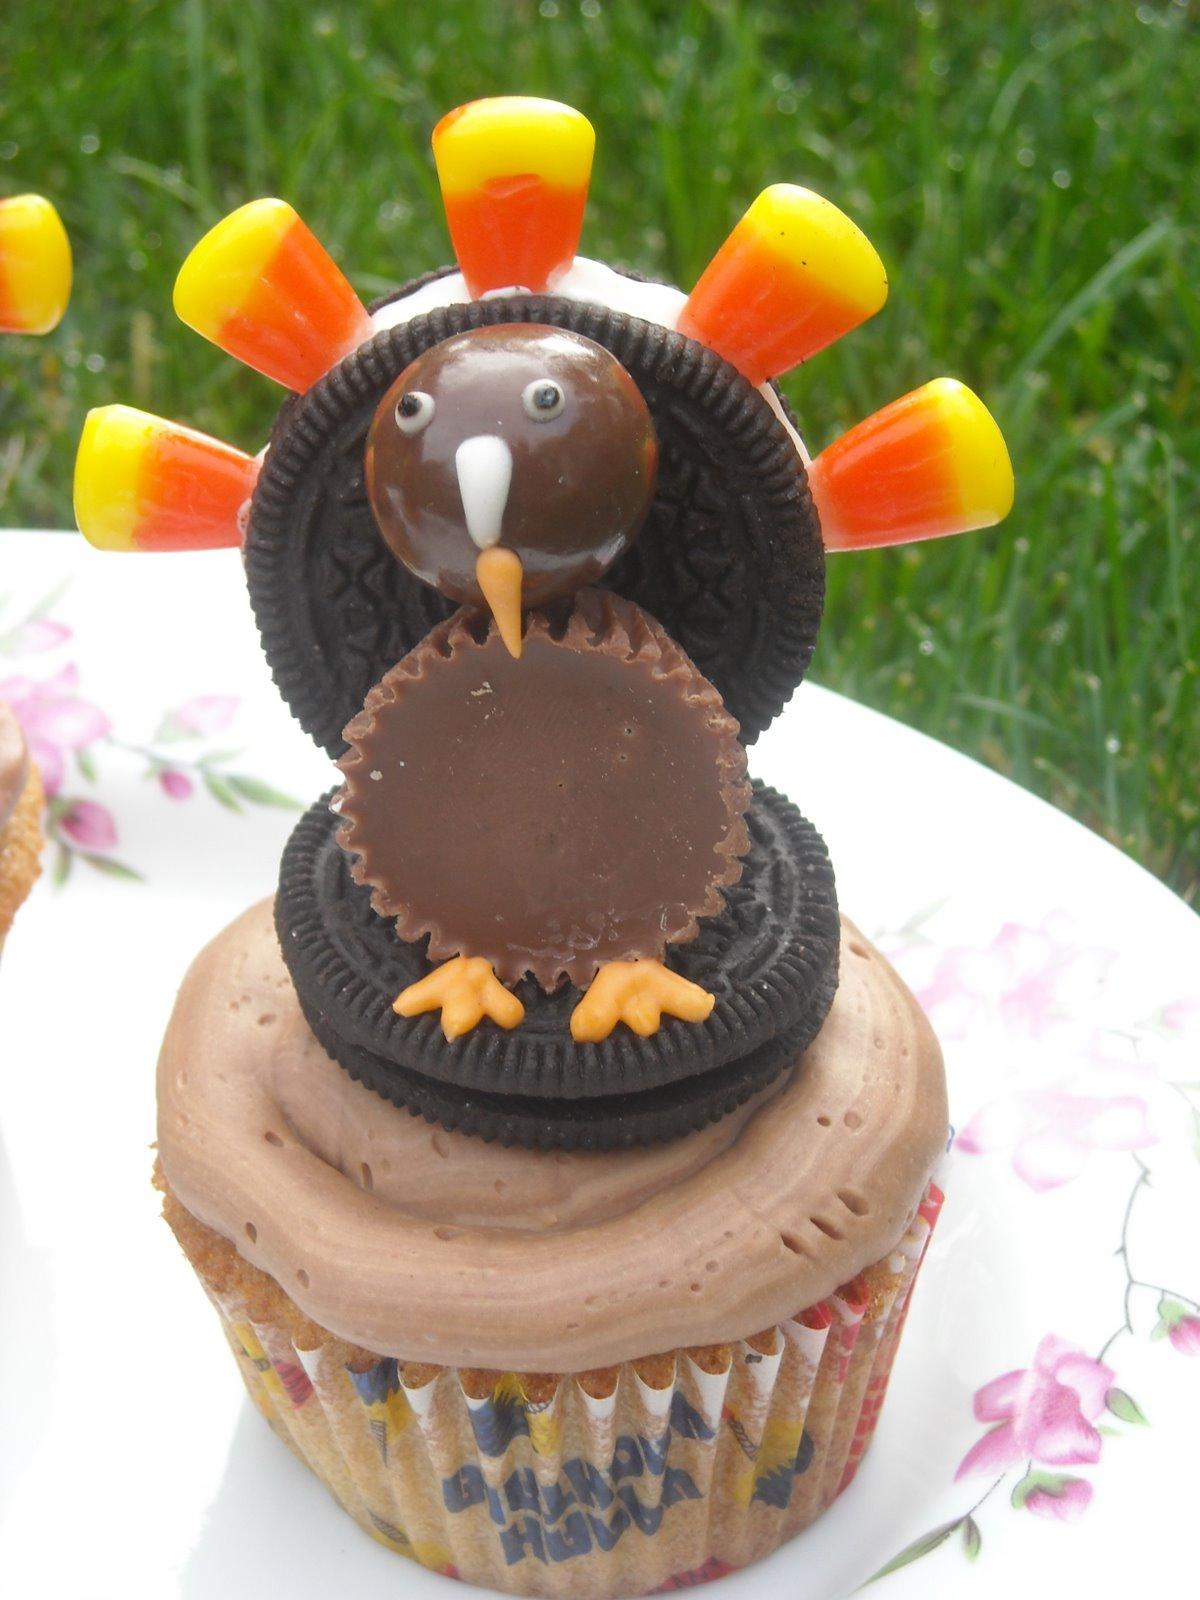 Turkey Cupcakes from Un Muffin